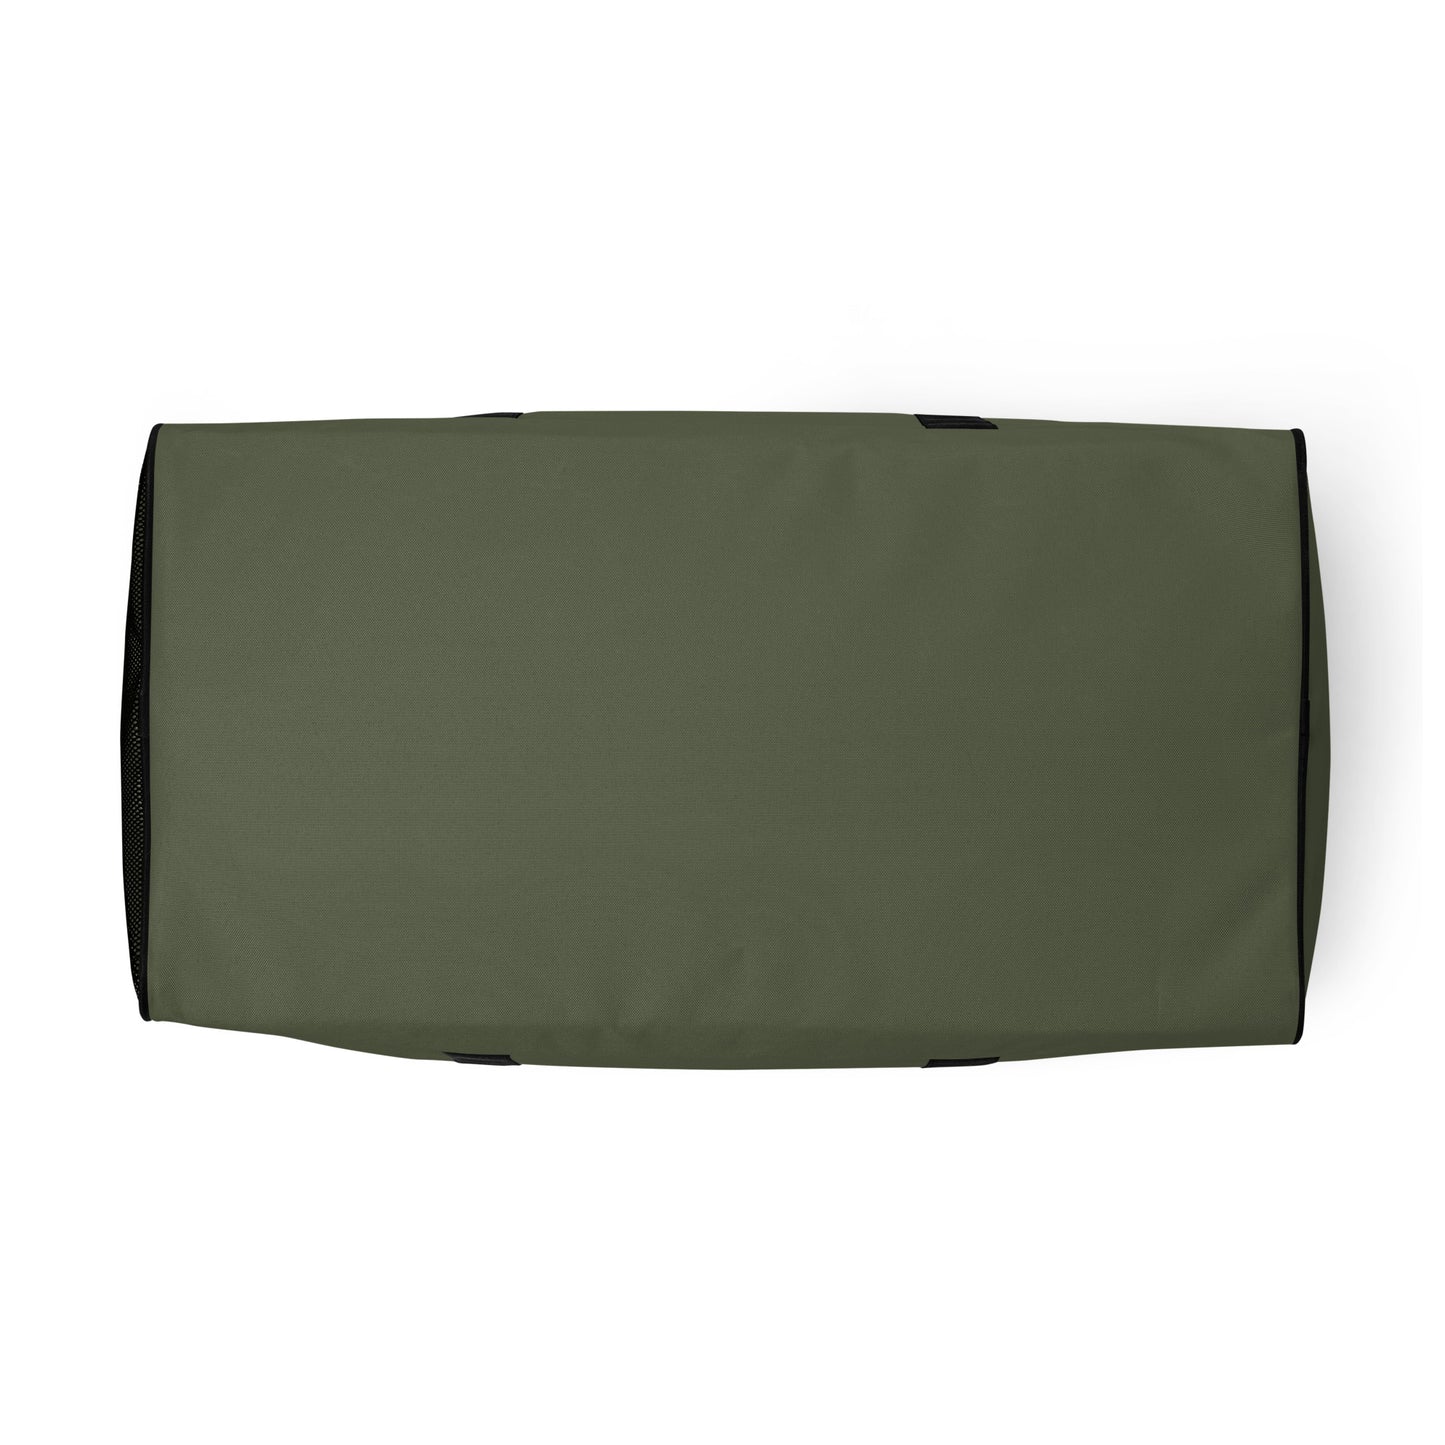 Badlands Extra Large Duffle Bag in army green